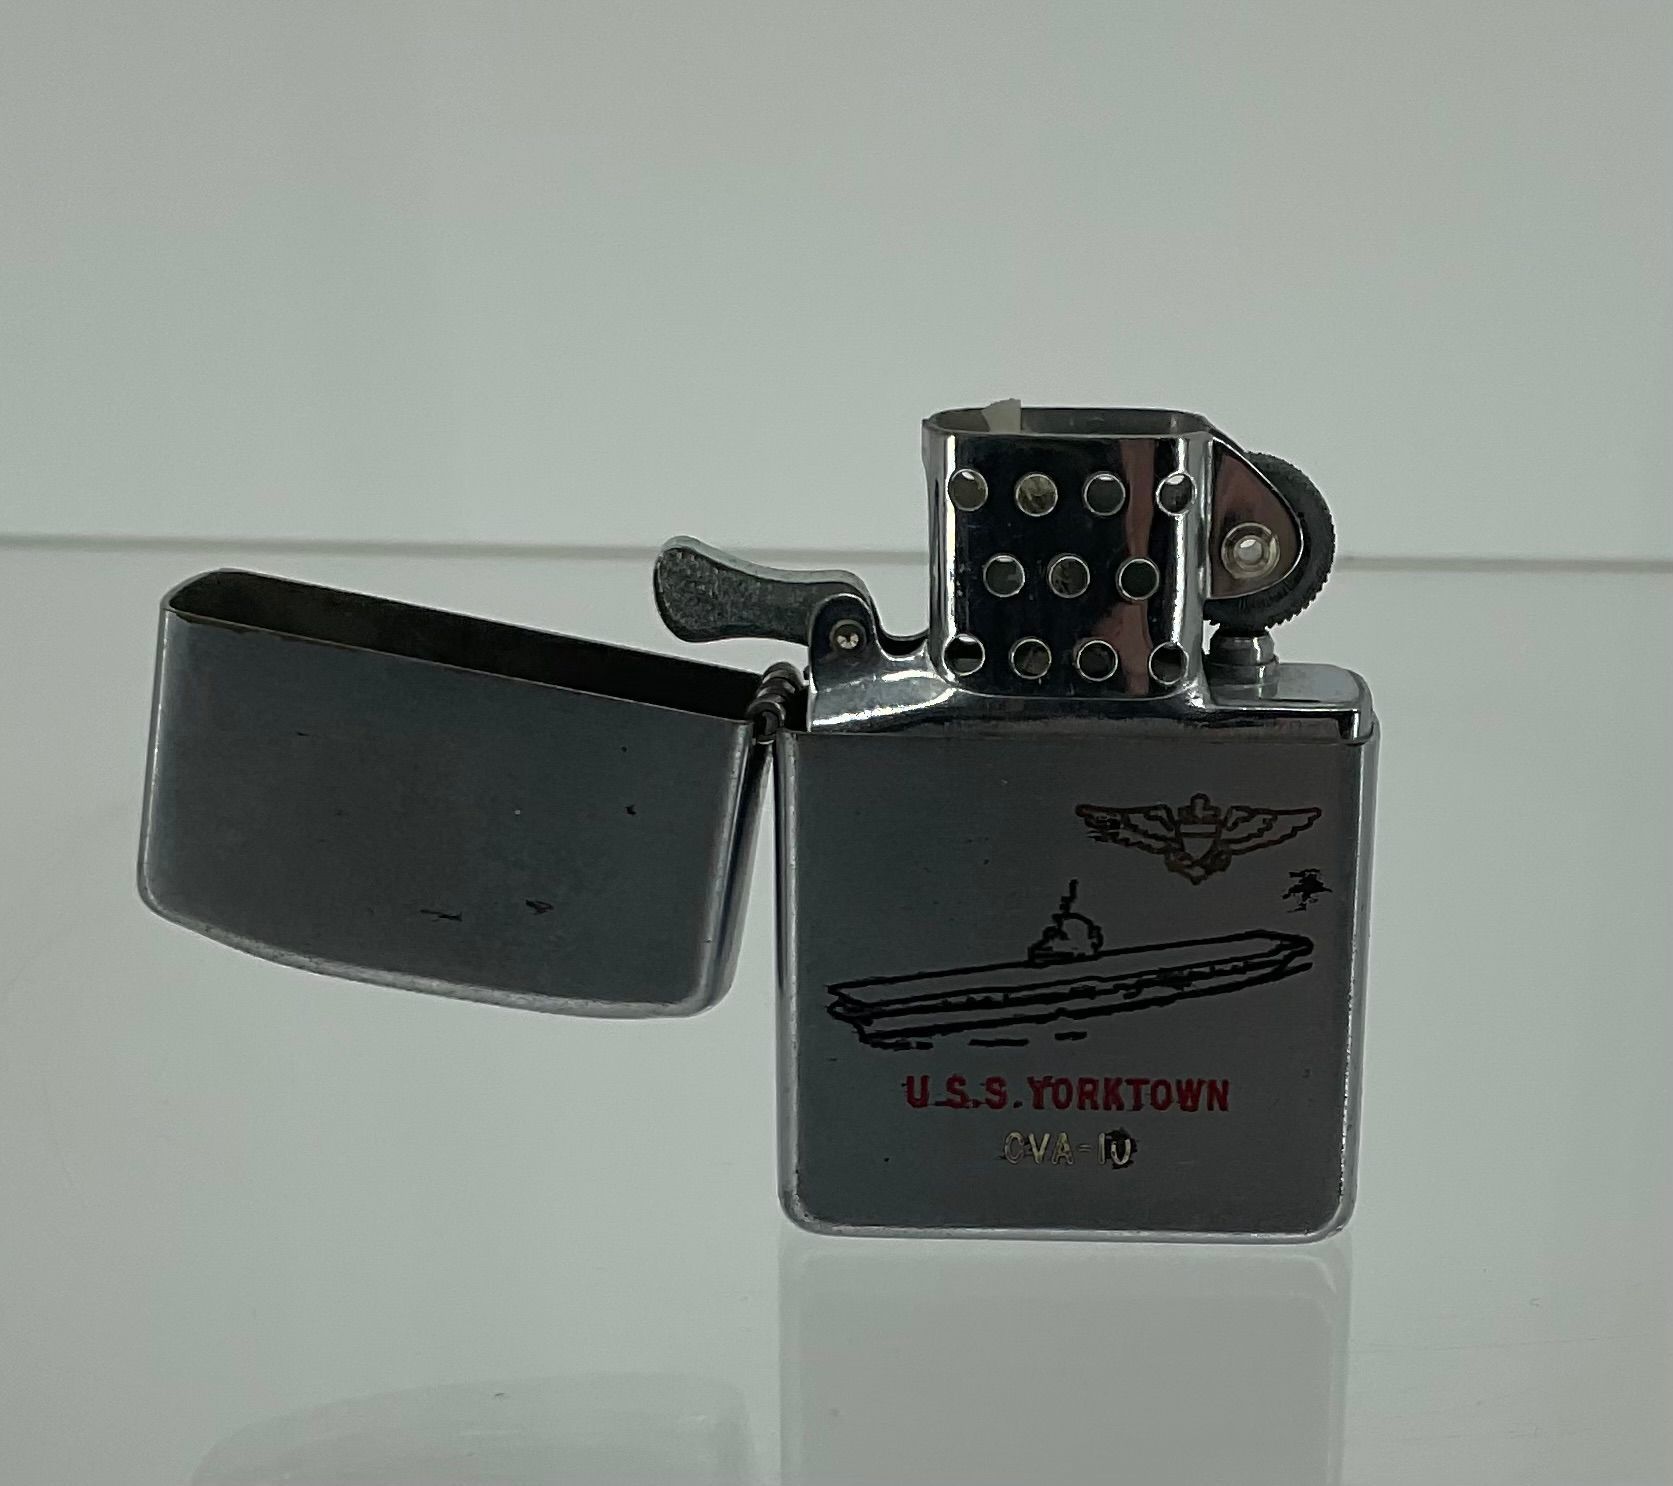 Primary Image of Personalized Lighter of Arnold McKechnie, Sr.